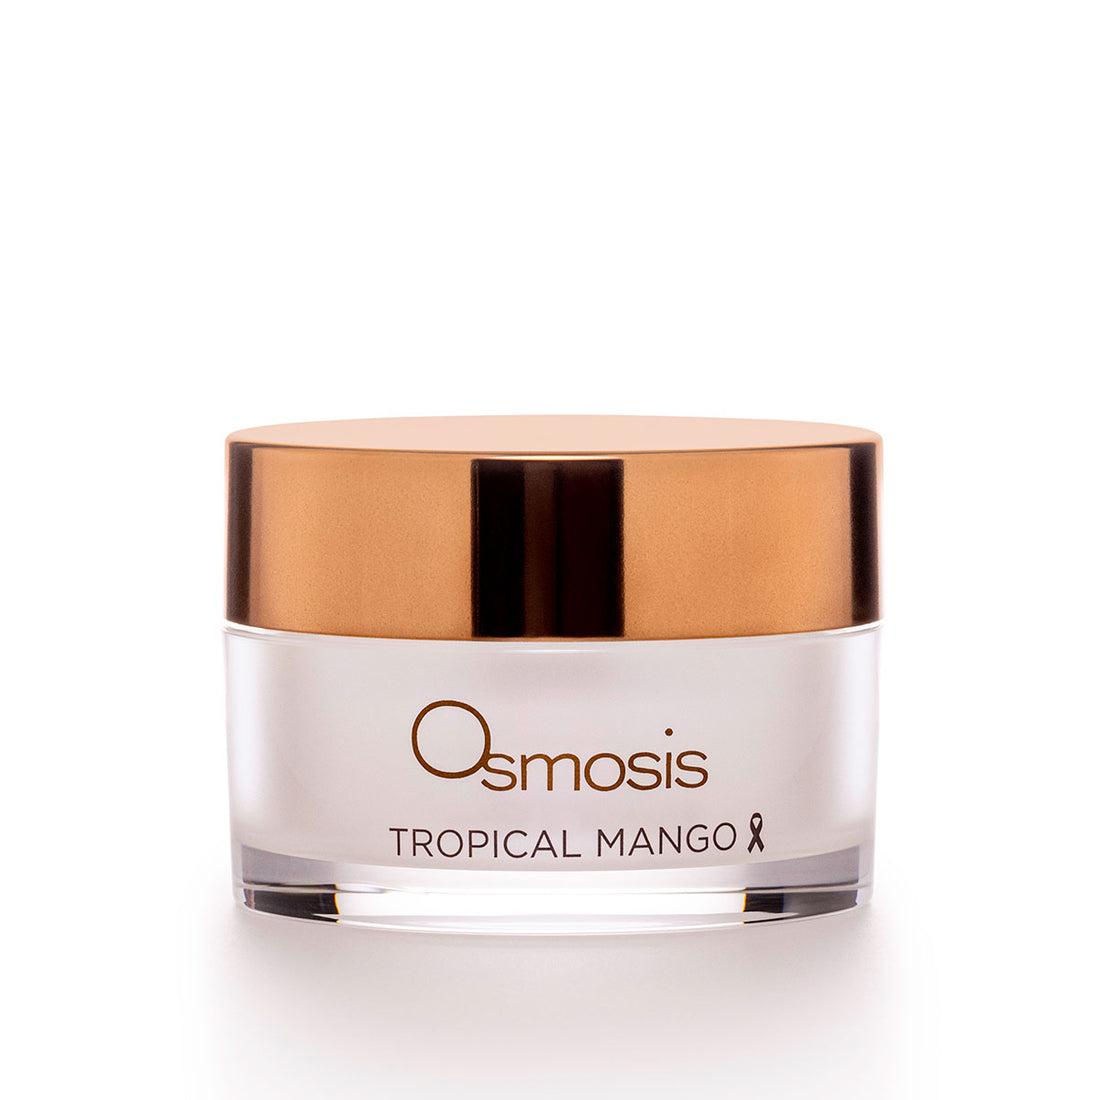 Osmosis Tropical Mango Barrier repair mask can be used daily to build and repair the skins natural barrier to protect and keep hydrated